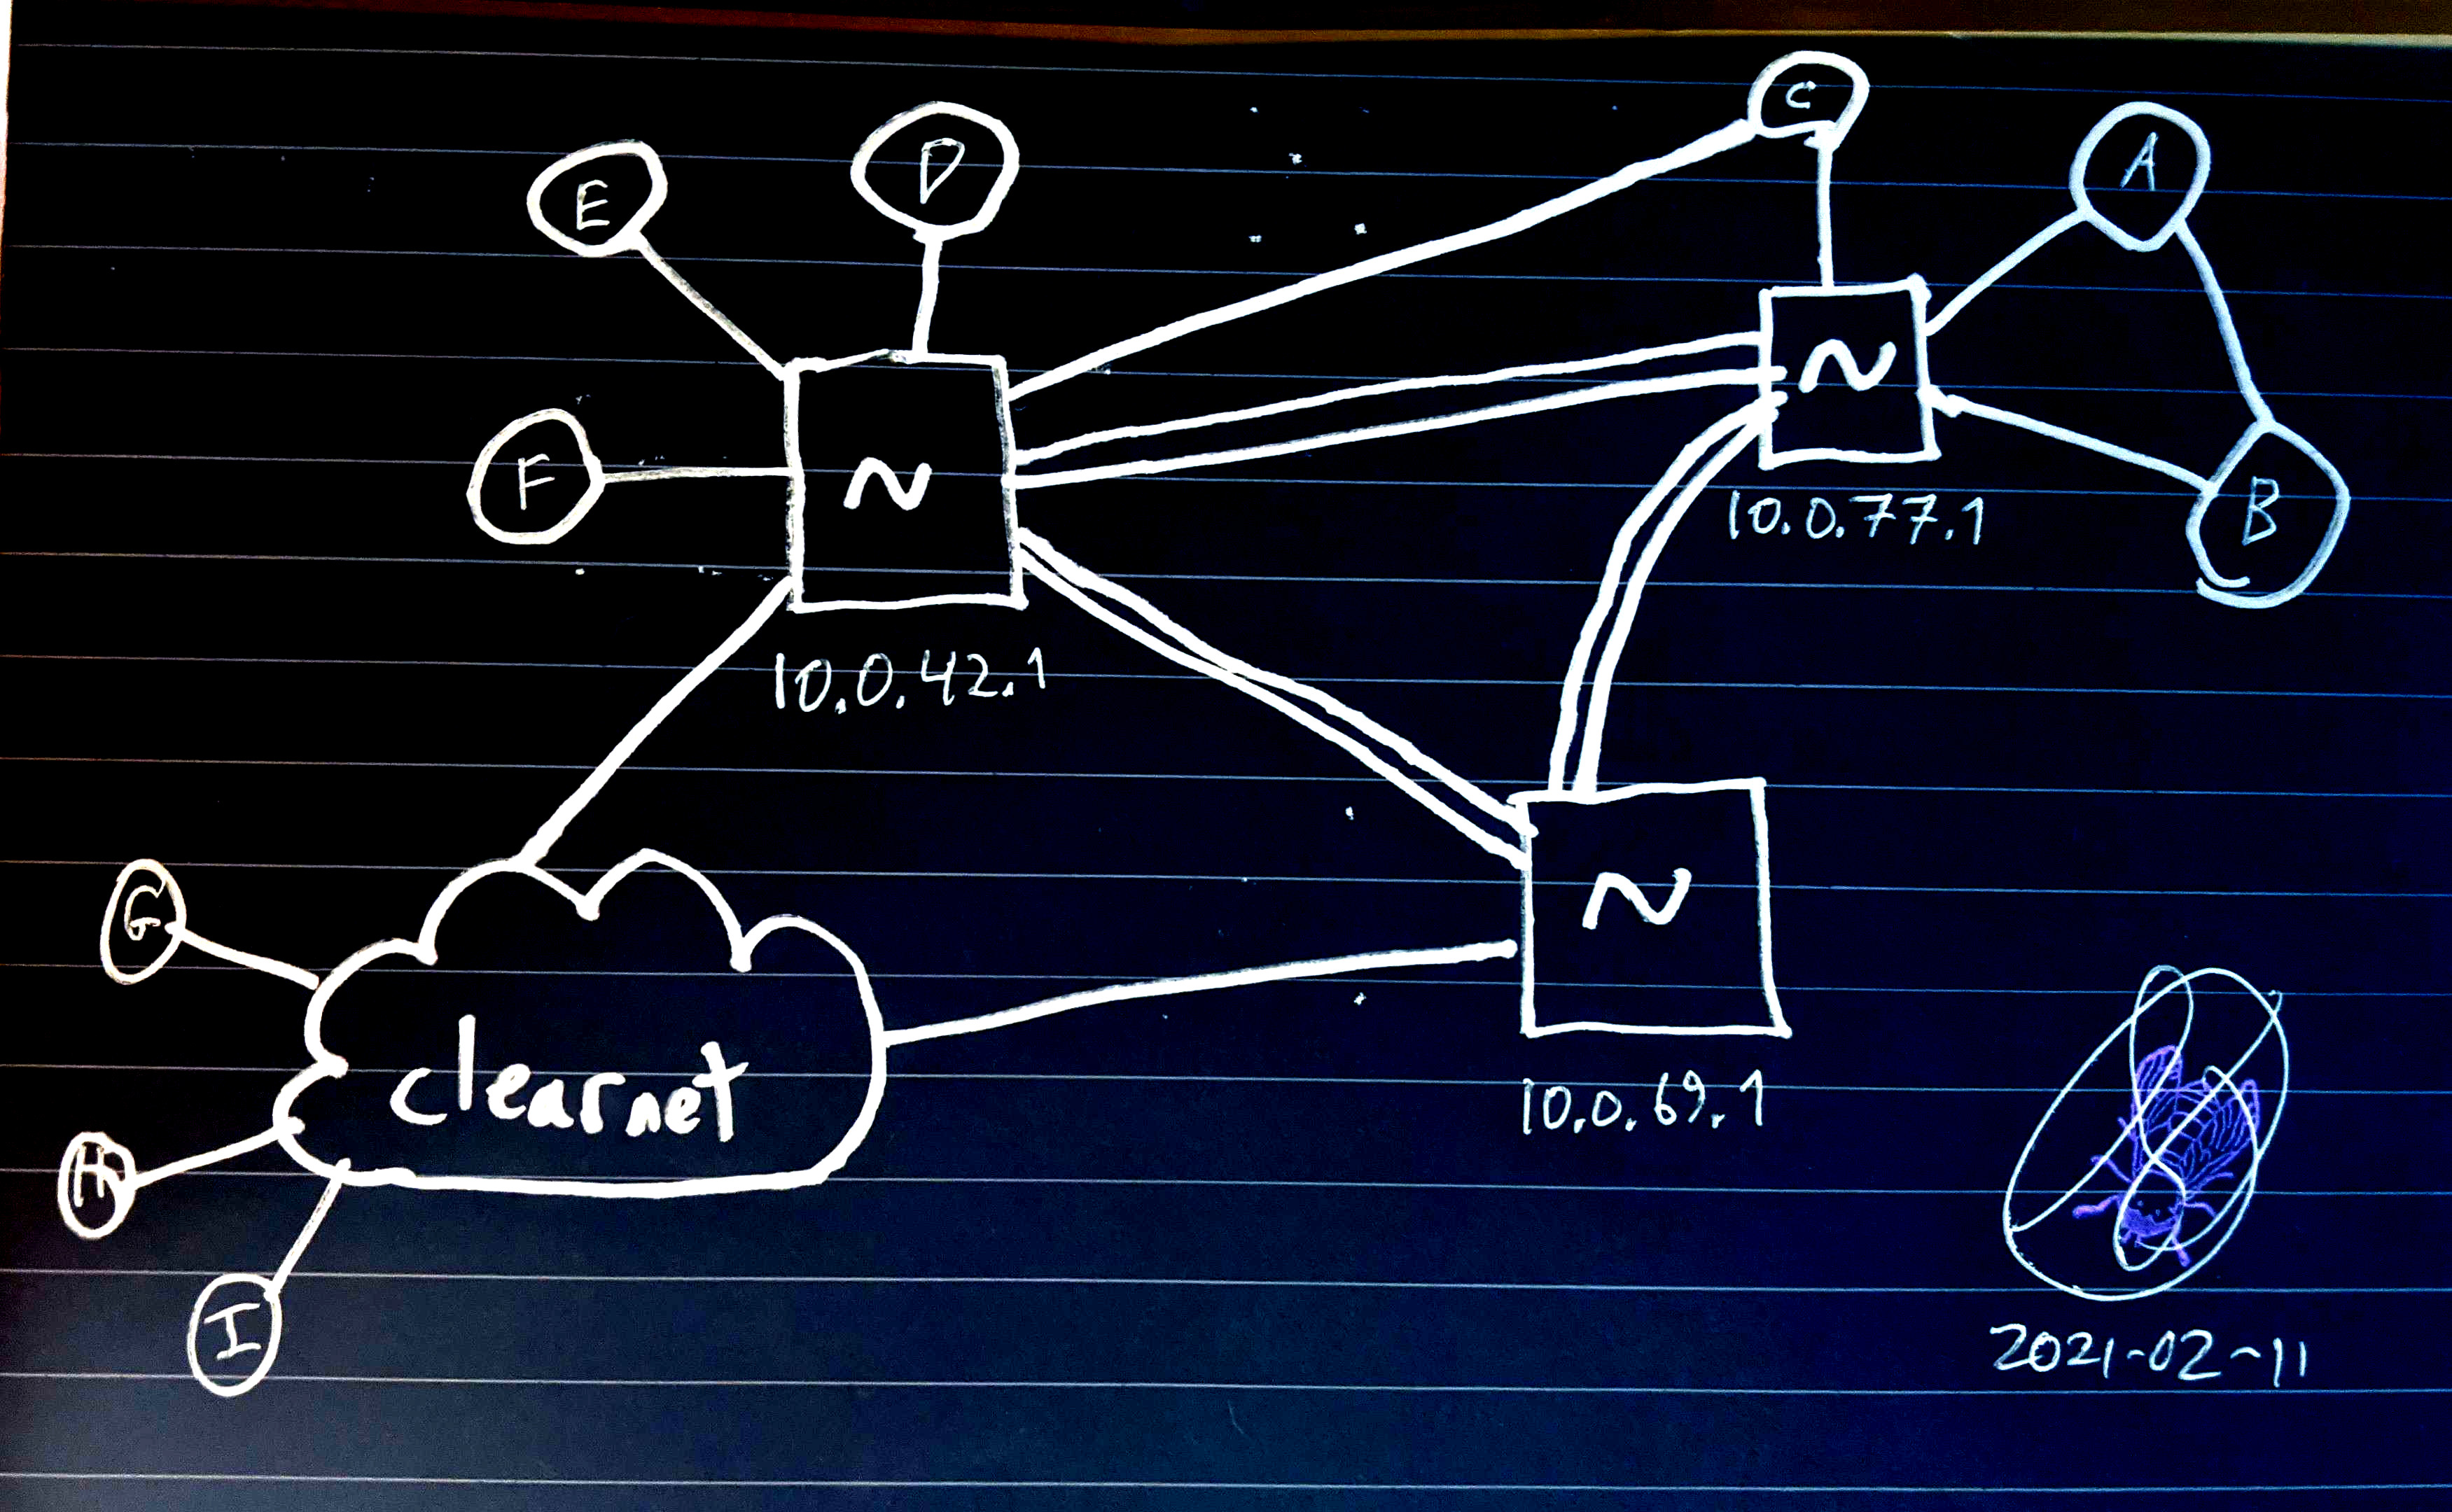 Network diagram showing a network of networks